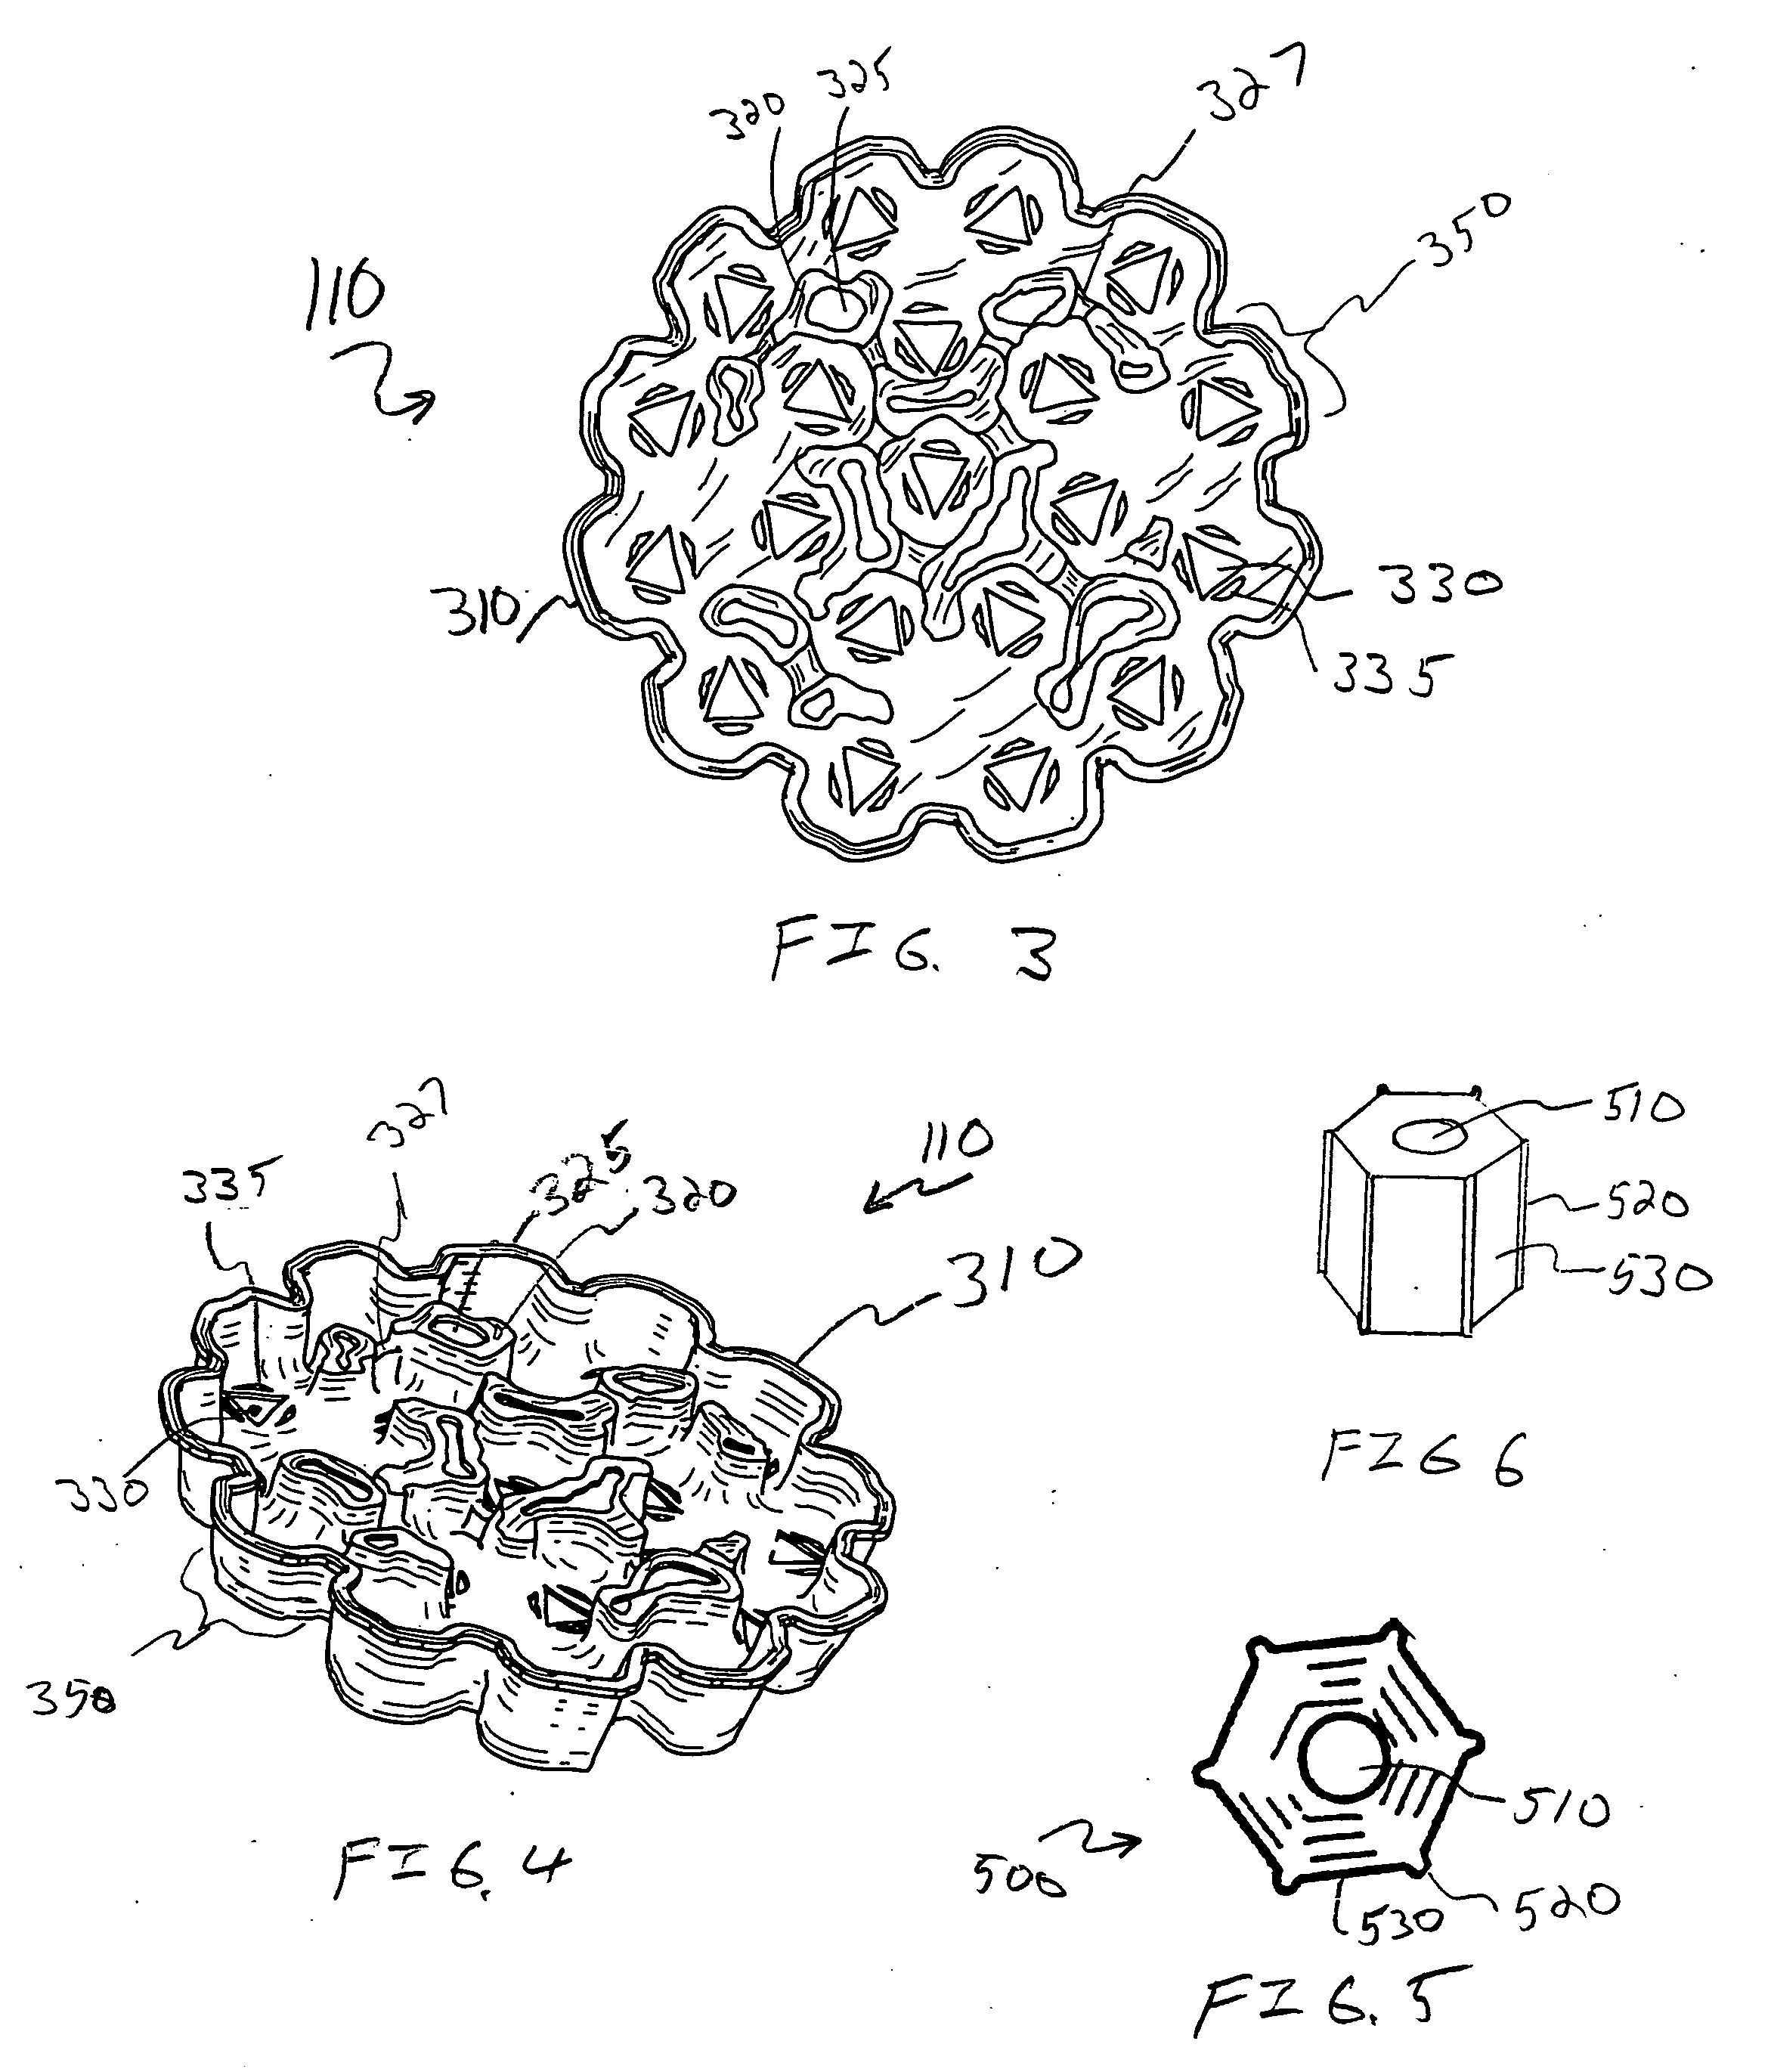 Ignition system for flammable material